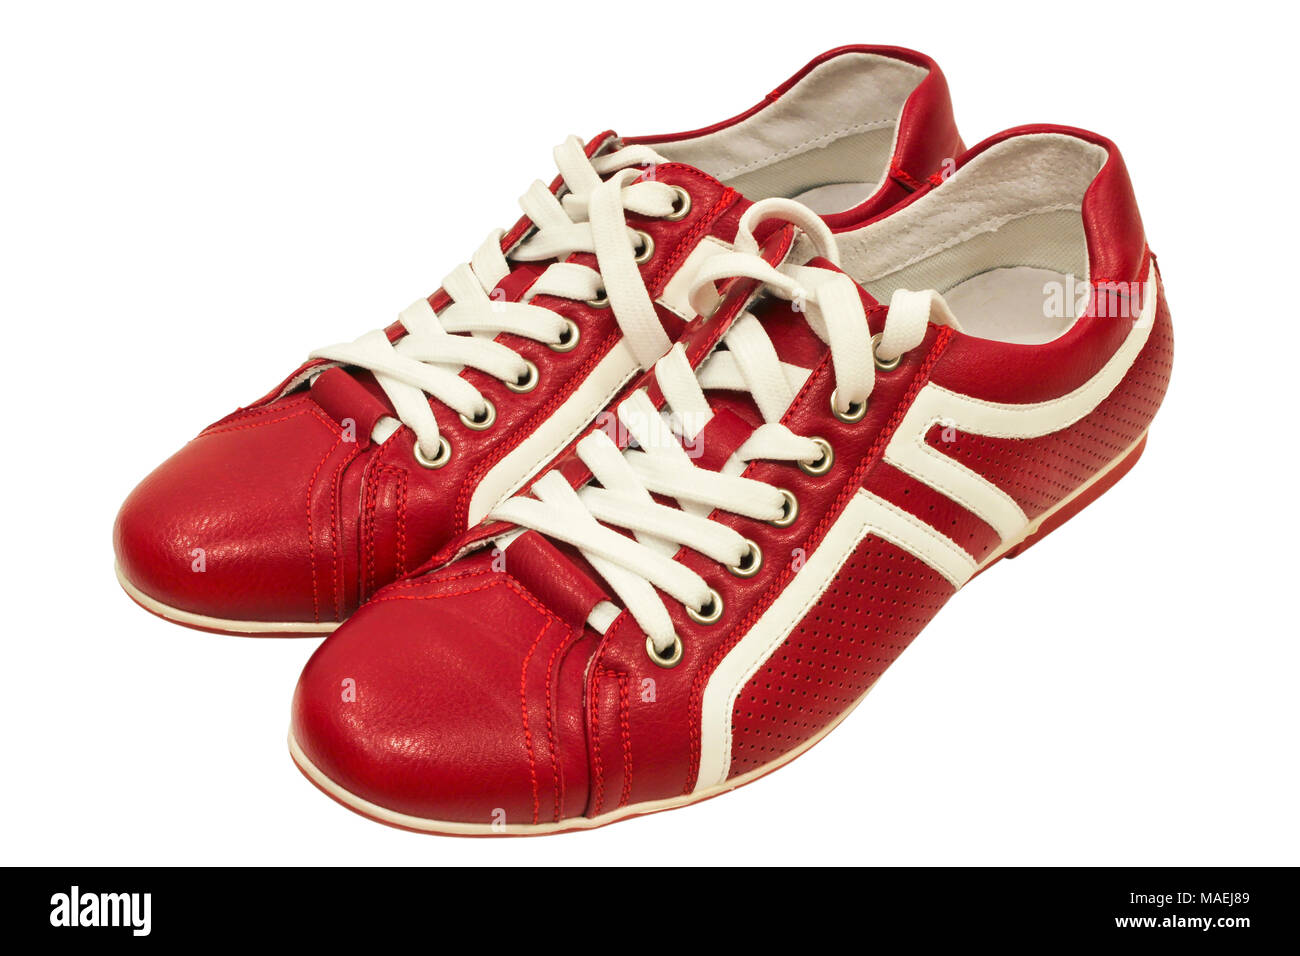 Red leather sneakers isolated on white background Stock Photo - Alamy